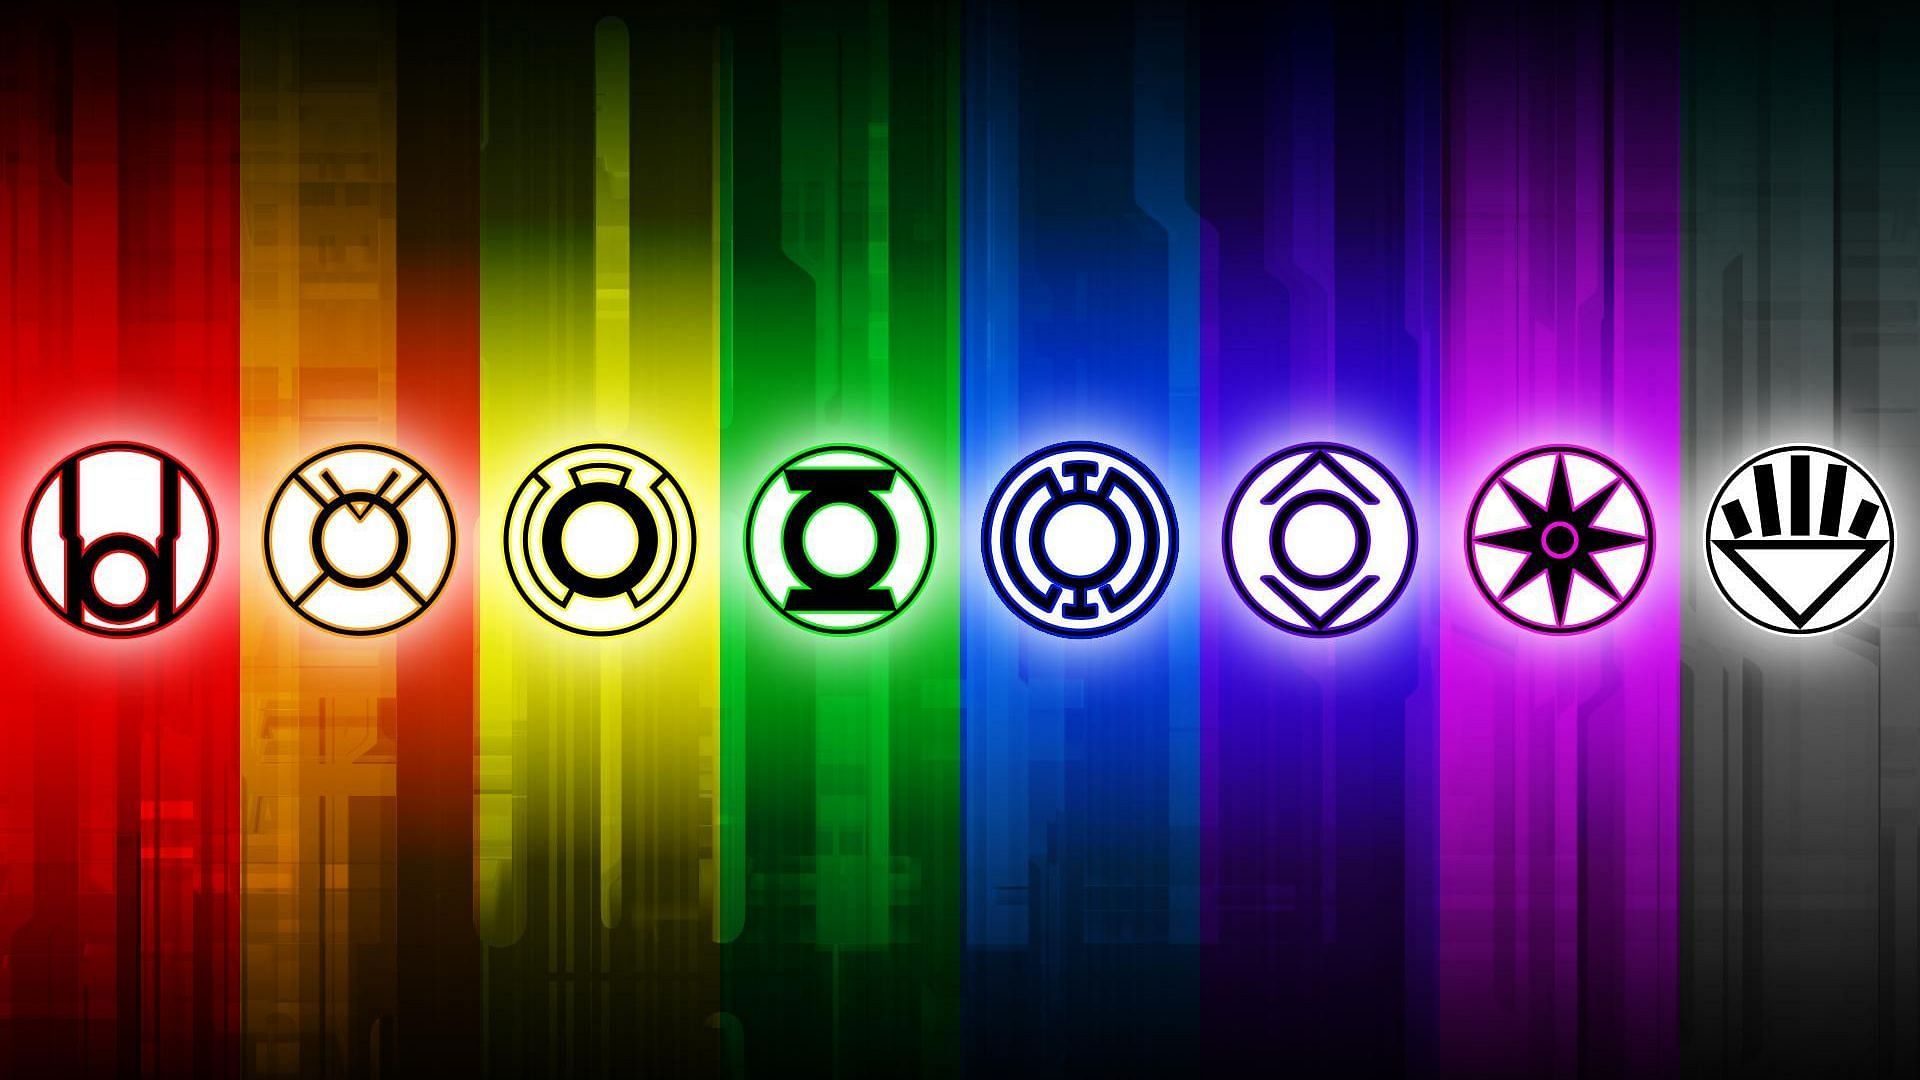 The symbols of the power rings. (Image via Getty Images).